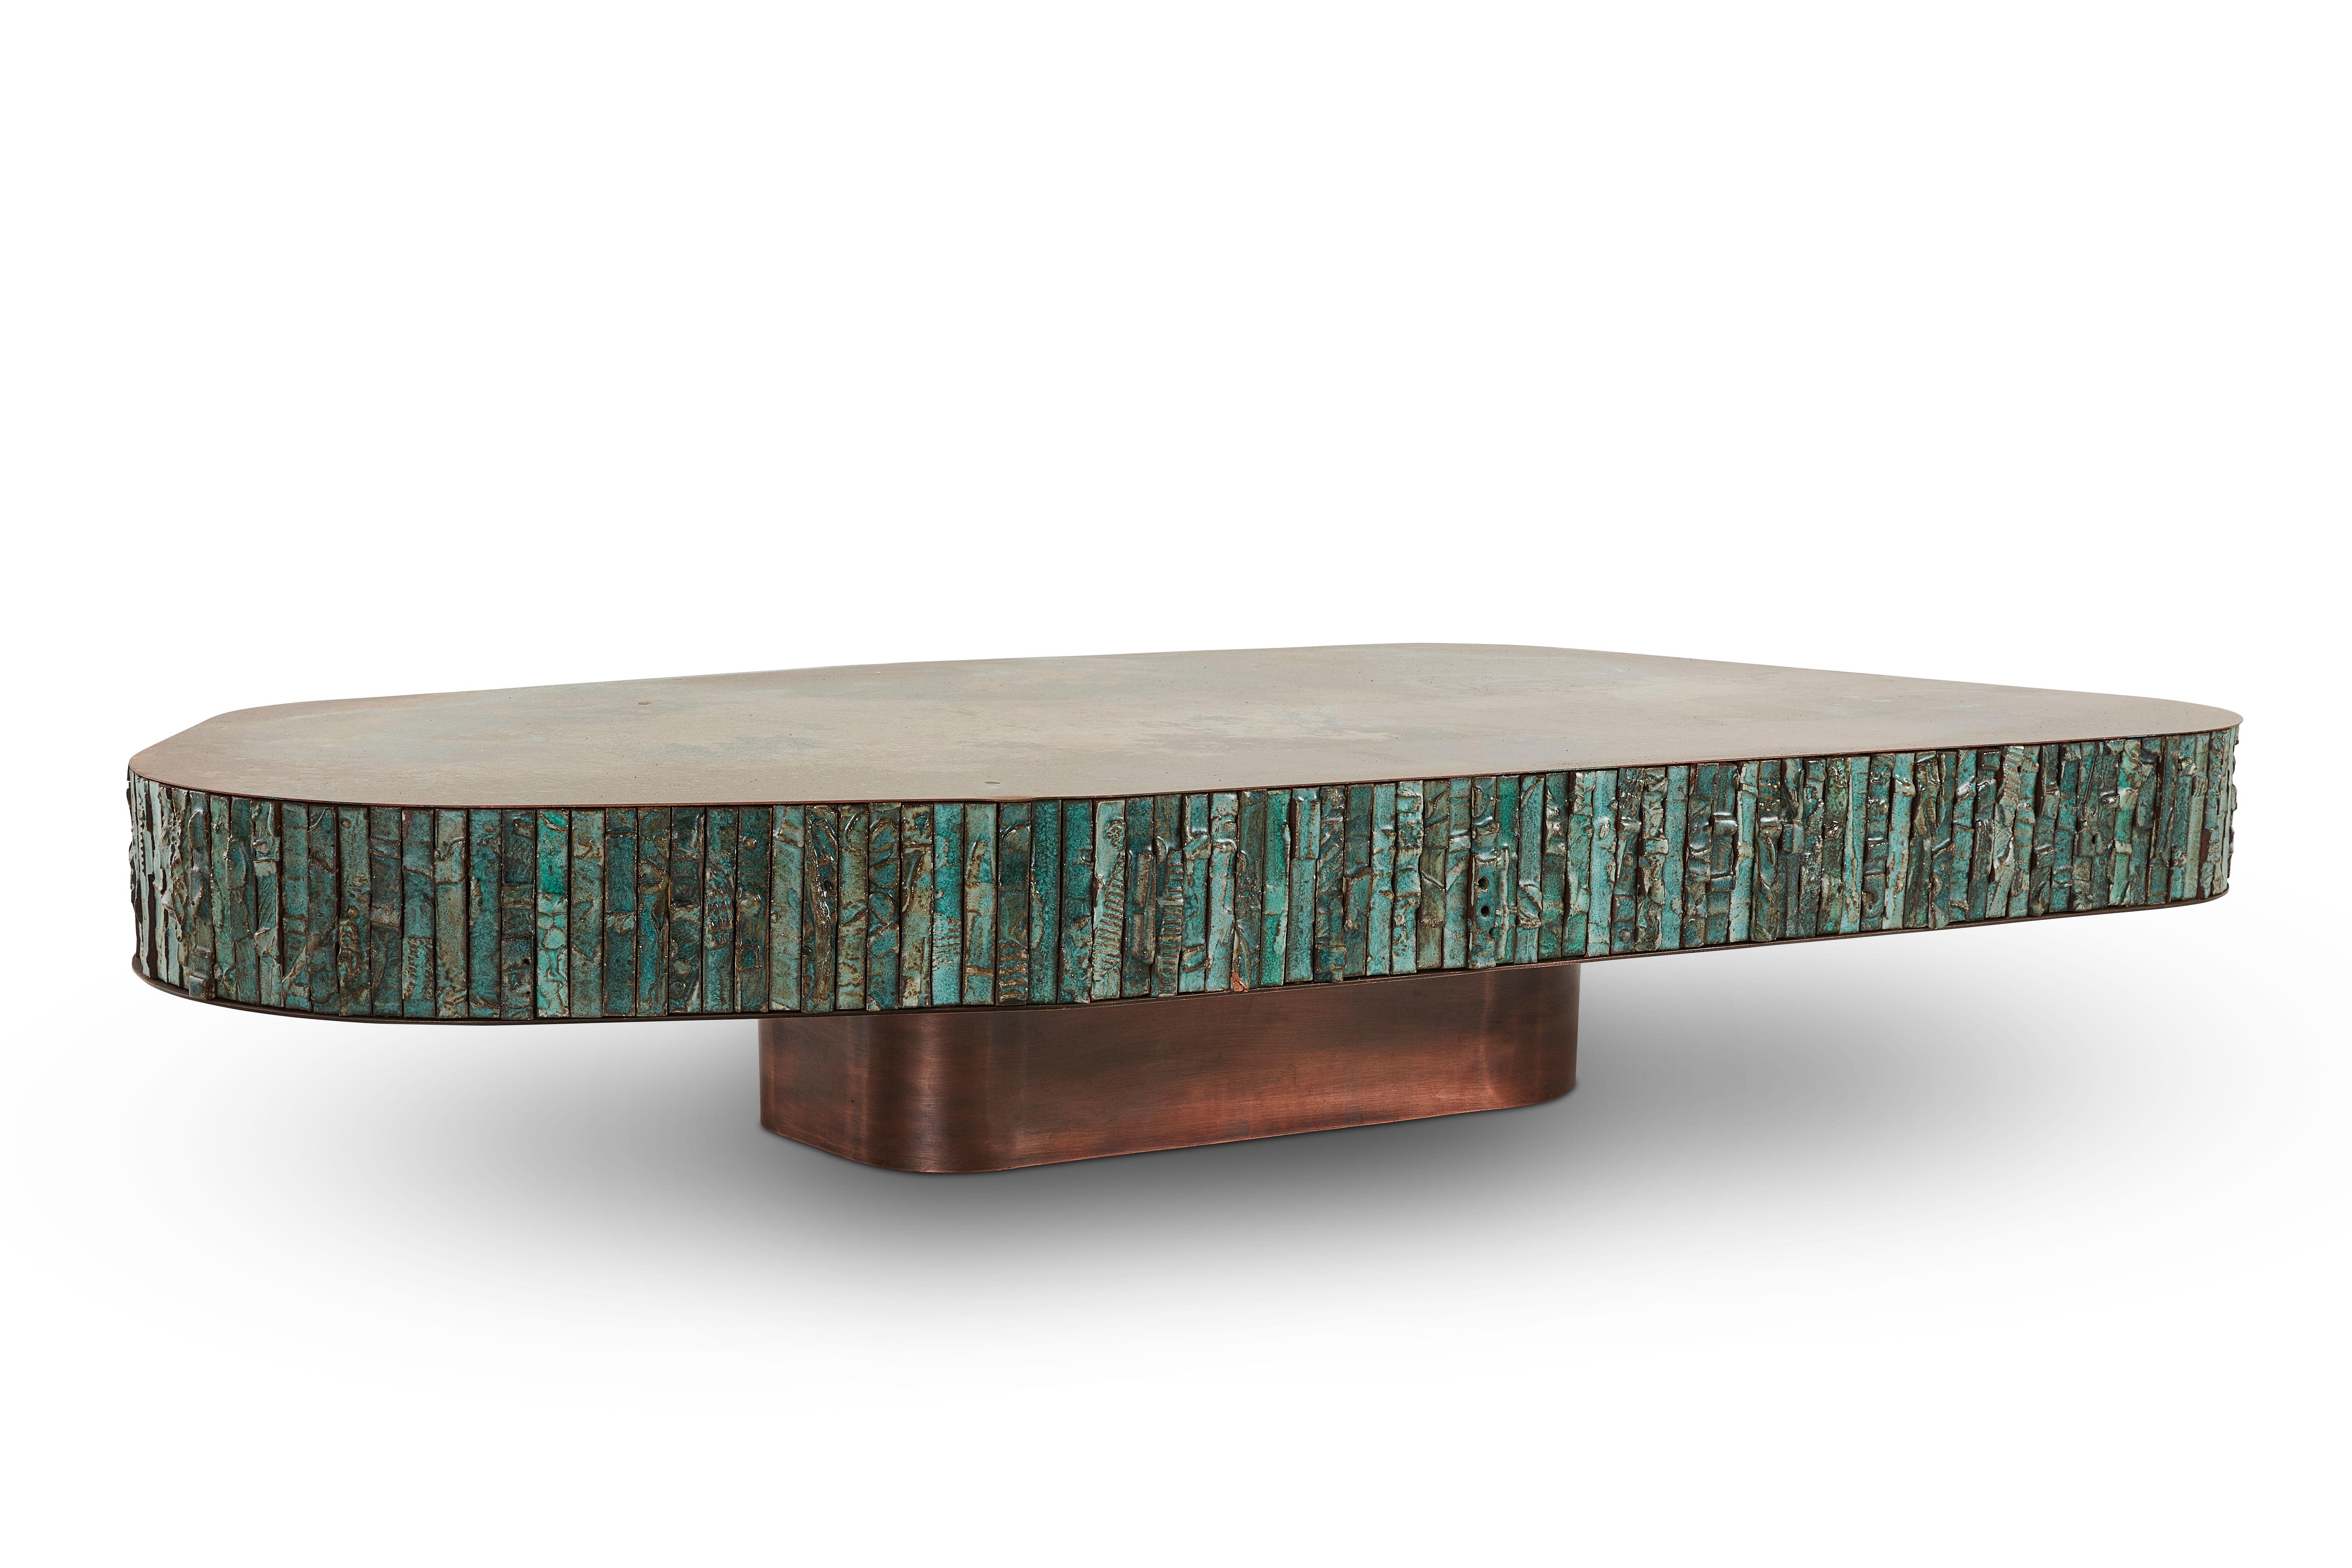 Boogie Nights coffee table by Egg Designs
Dimensions: 185 L X 106 D X 35 H cm
Materials: Antique Copper Coated, Solid Copper, Verdigris, Handmade Ceramic Tiles

Founded by South Africans and life partners, Greg and Roche Dry - Egg is a unique